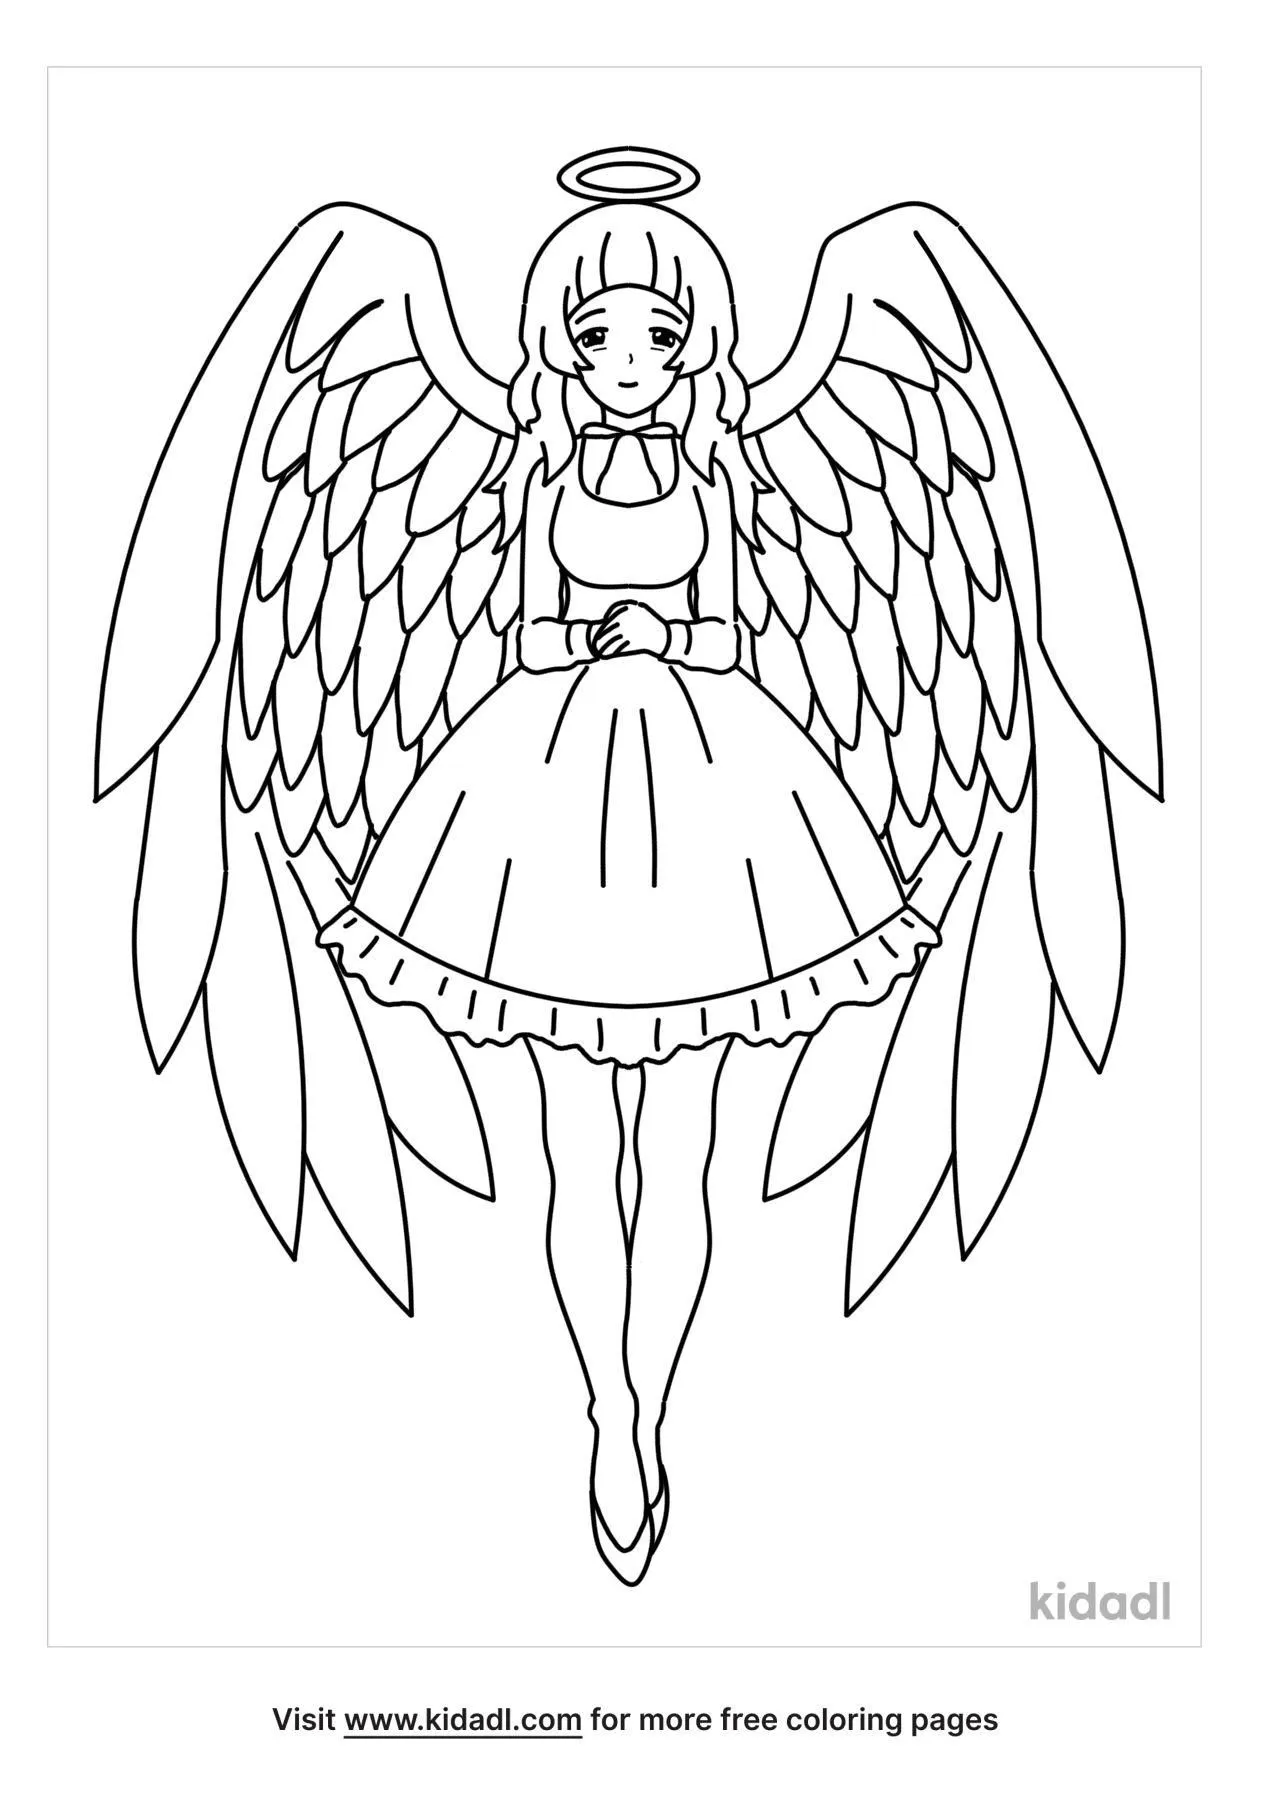 Anime Angel Coloring Page   Free Fairies Coloring Page   Kidadl